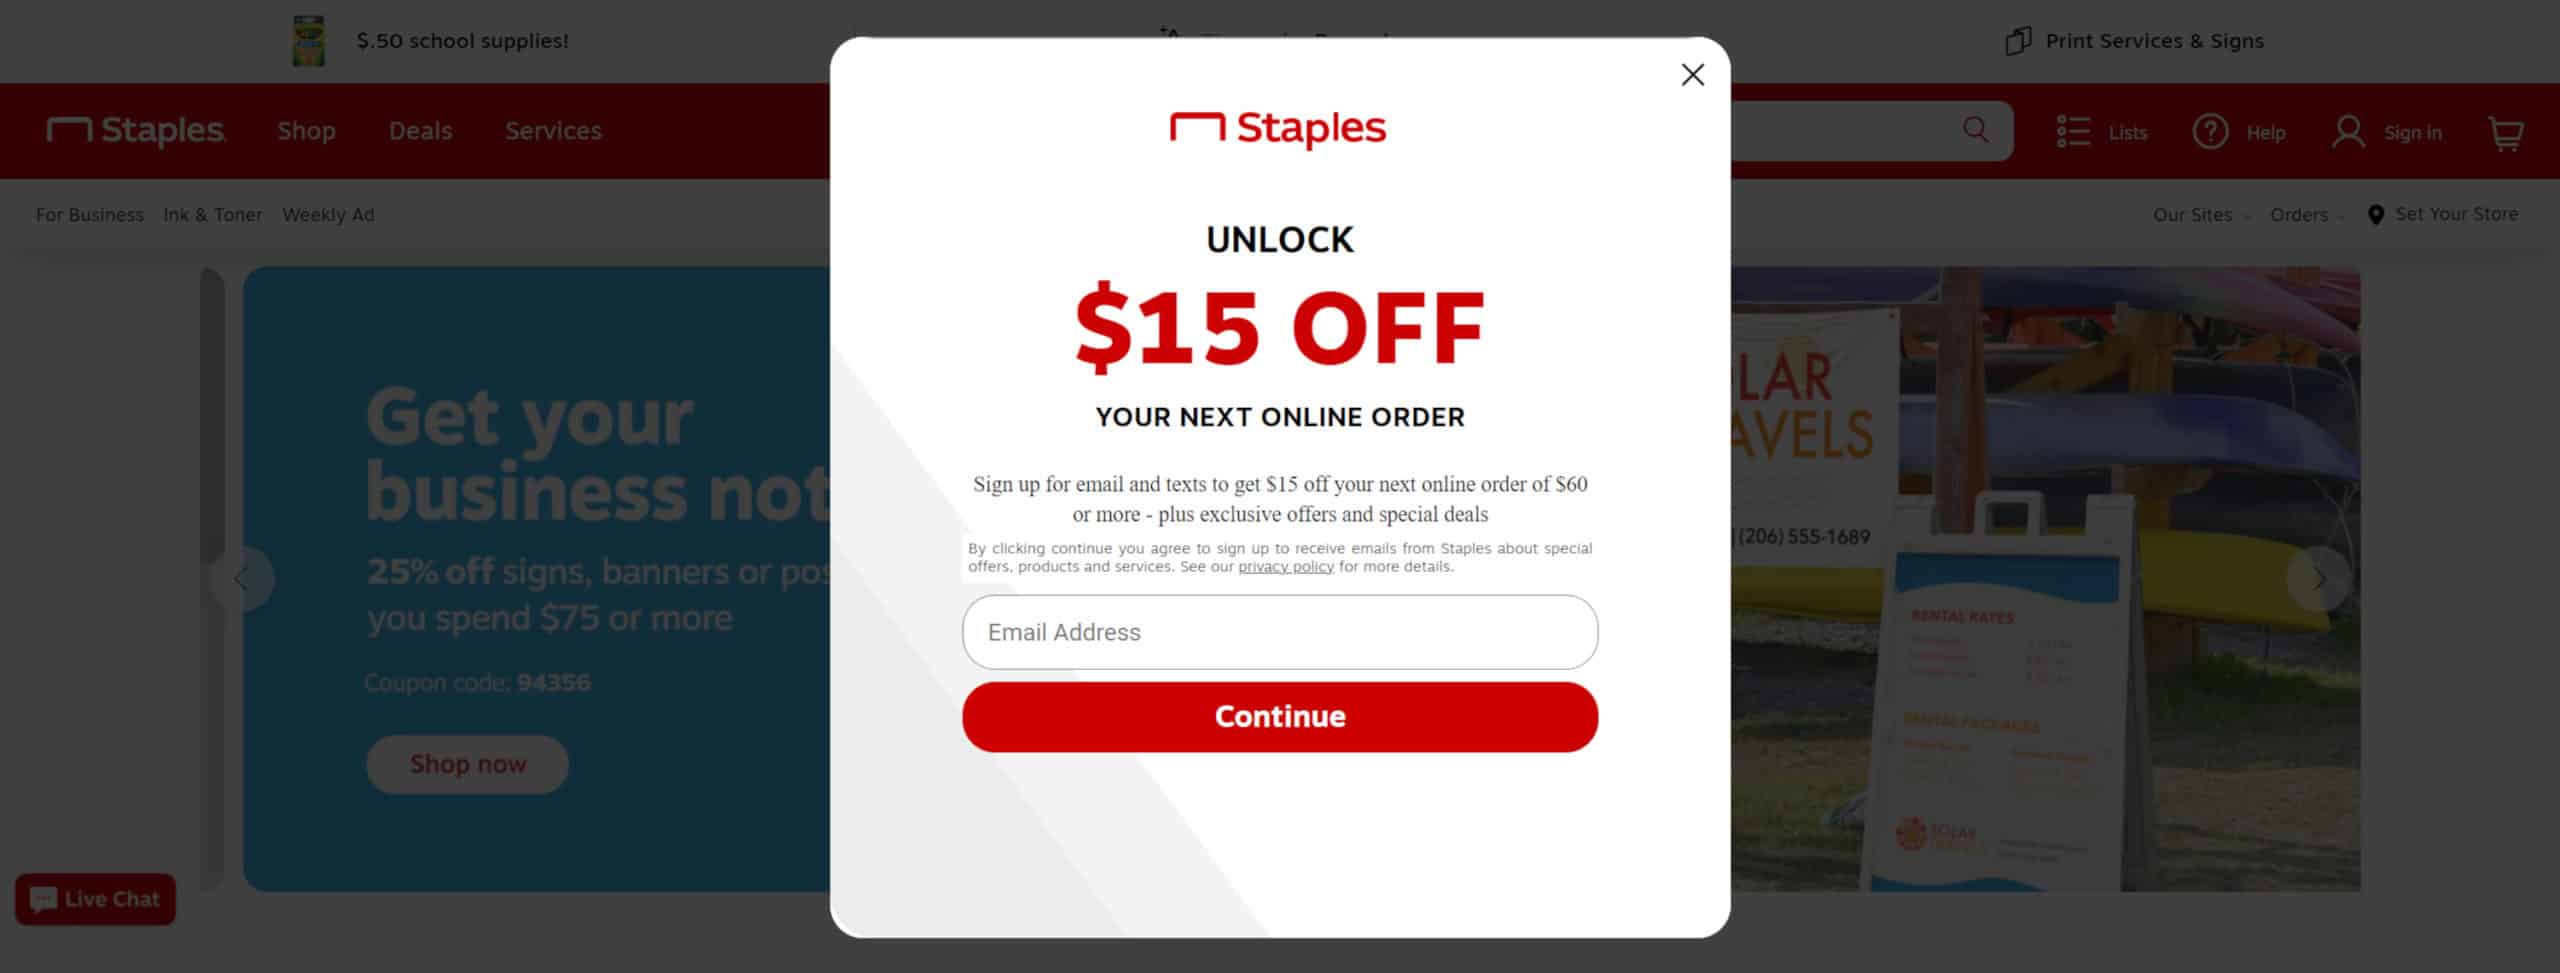 Promo code from Staples website for $15 off a minimum of $60